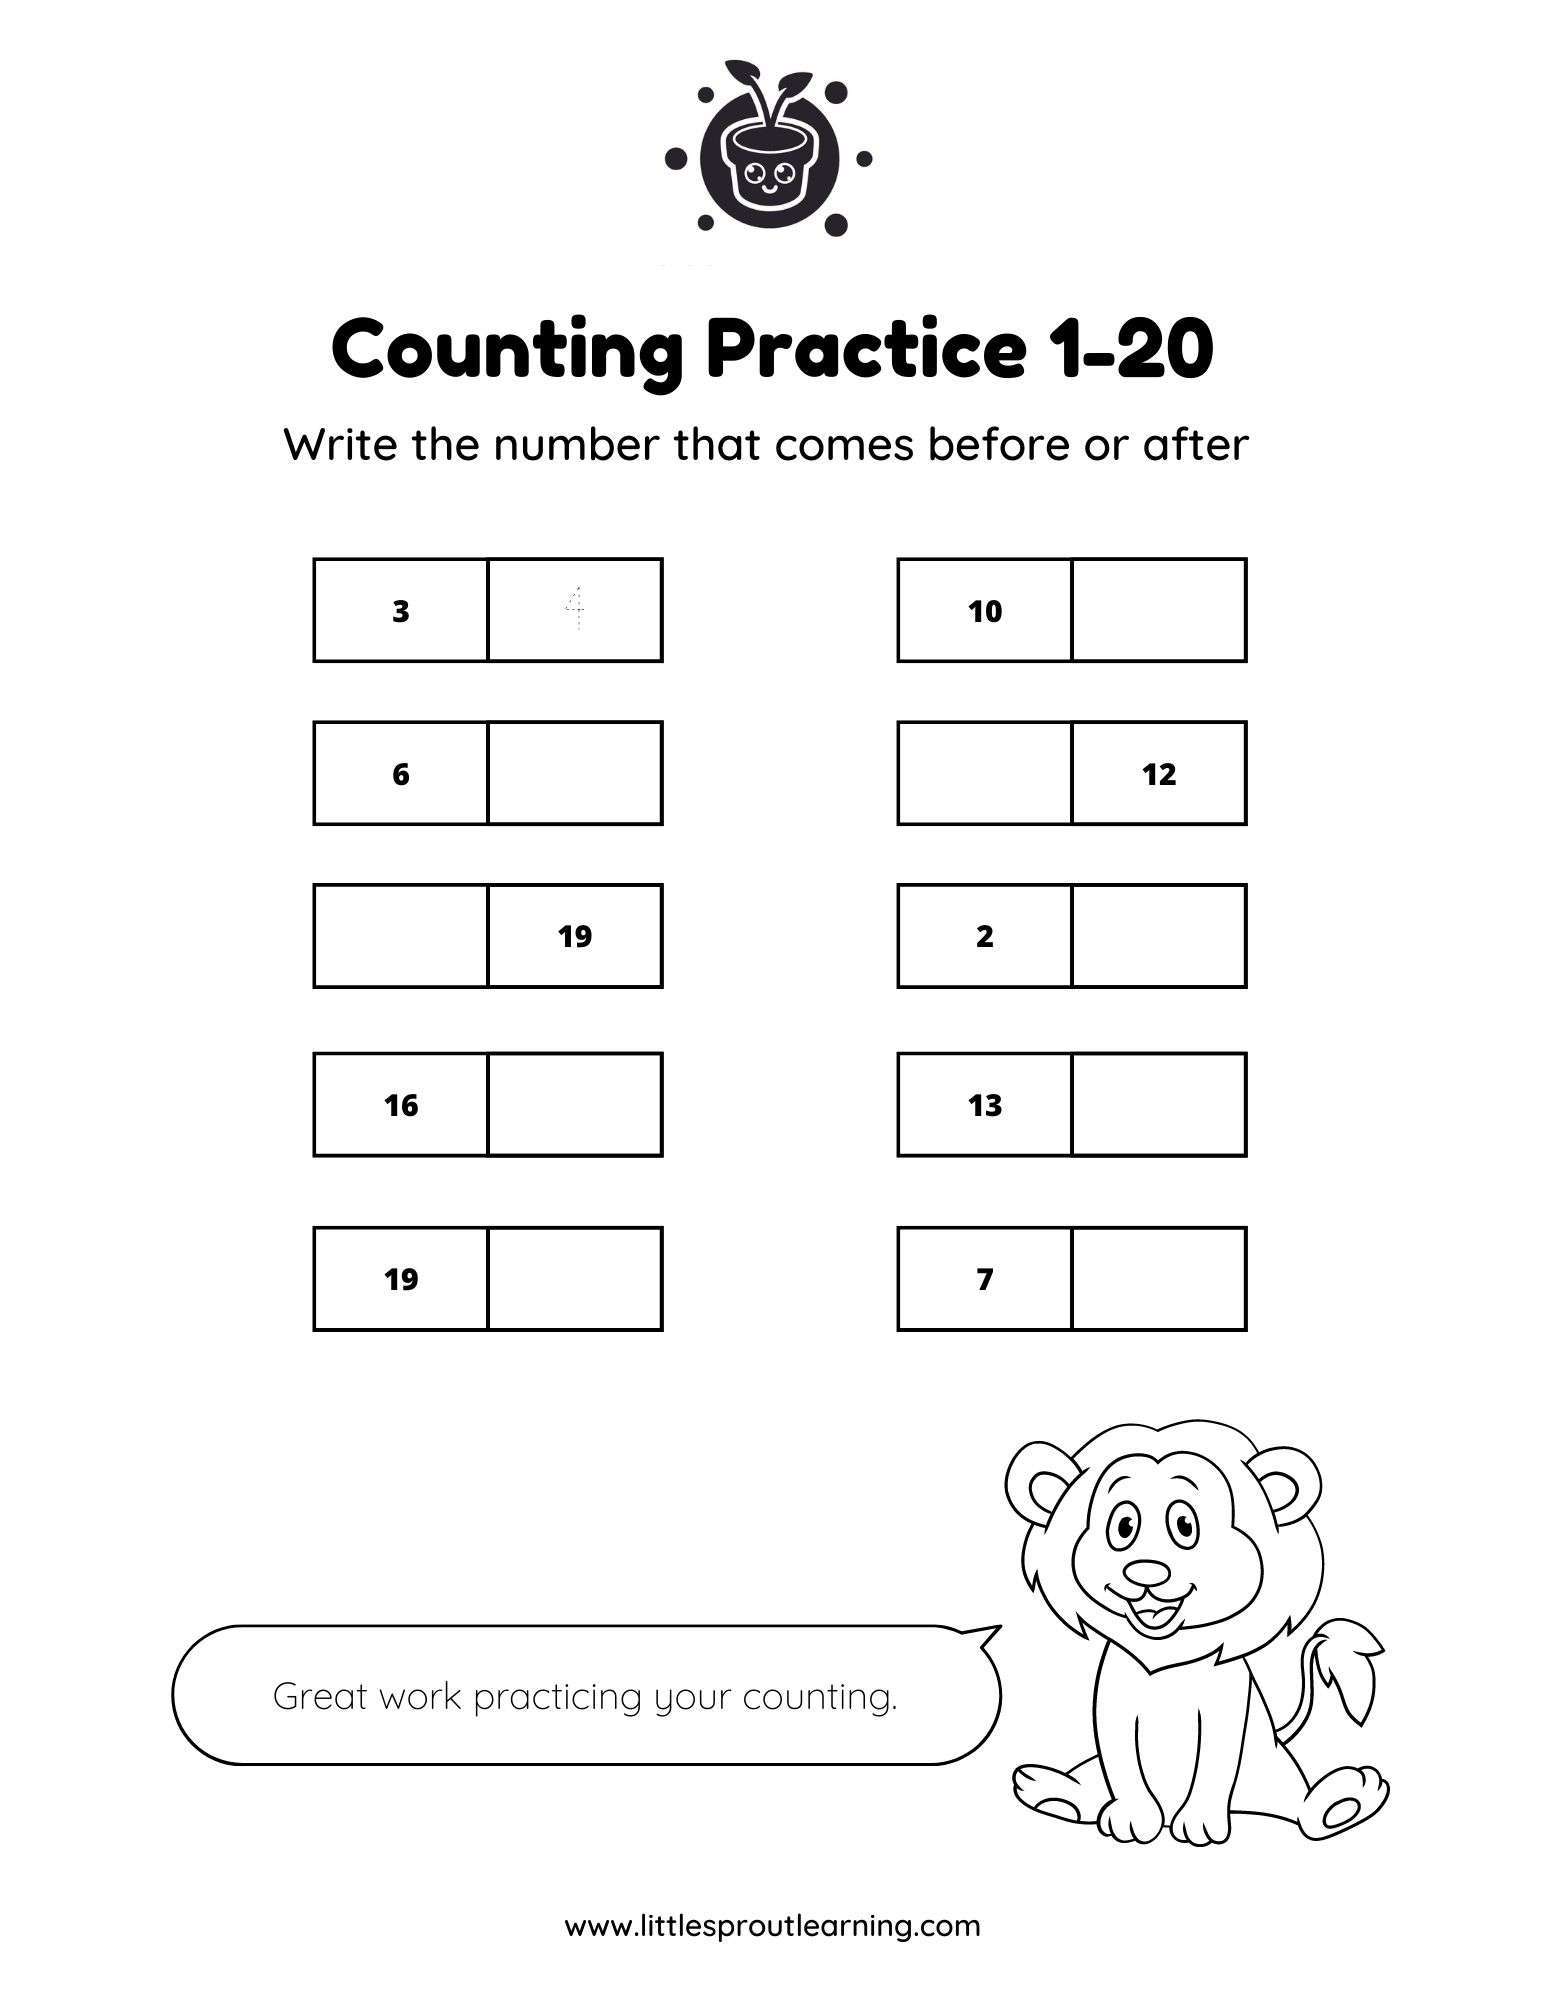 Counting Practice 1-20 – Fill In the Numbers Before or After